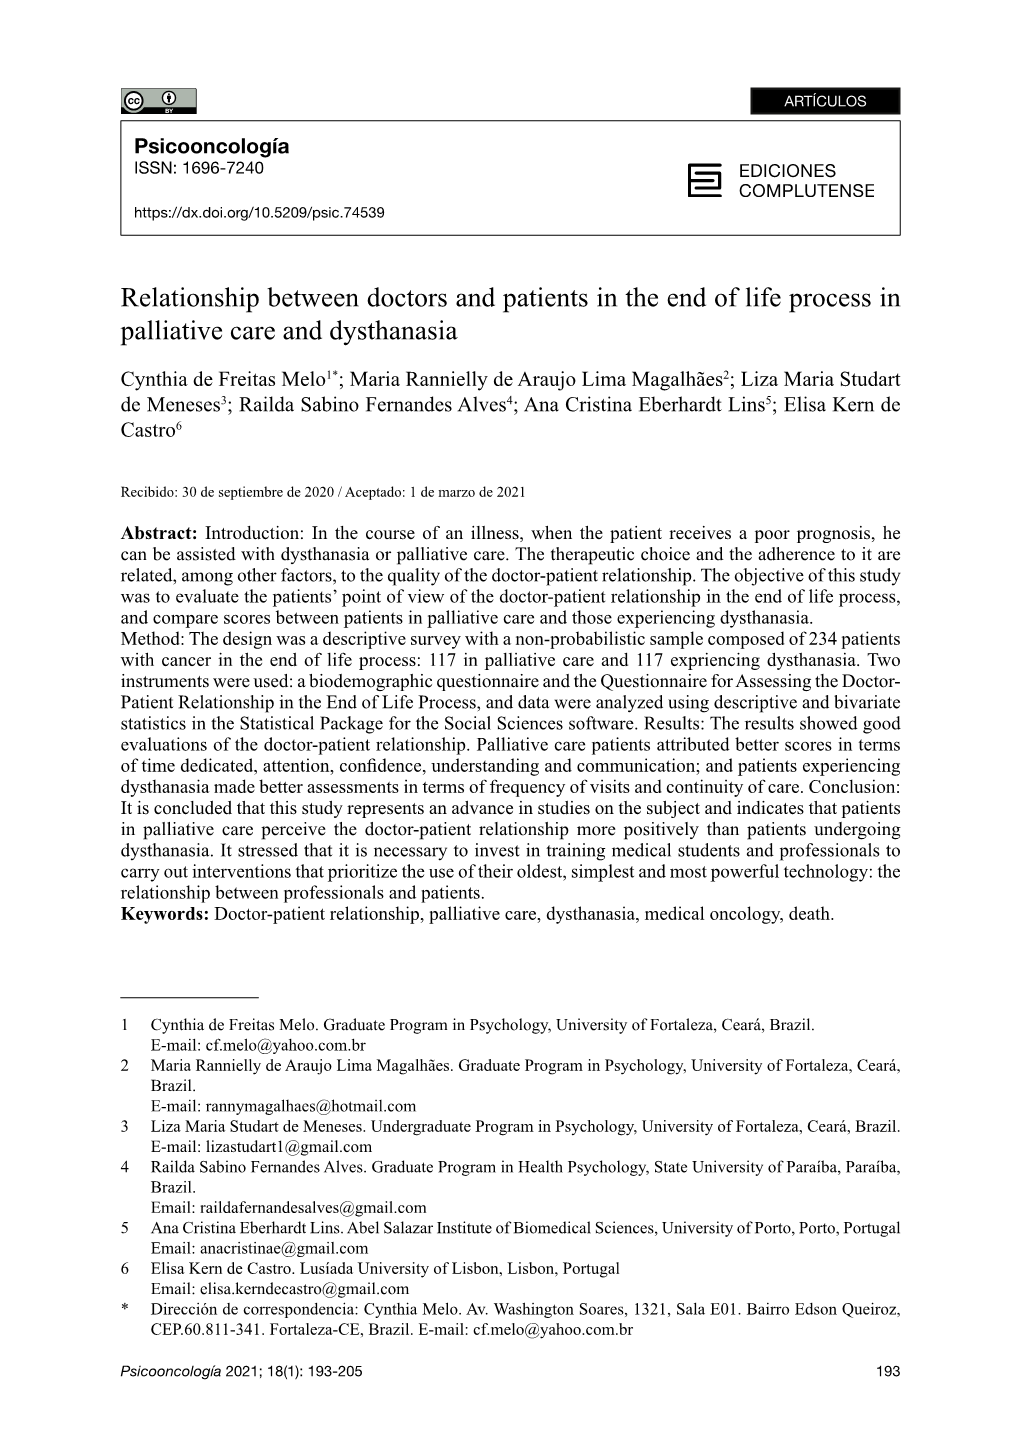 Relationship Between Doctors and Patients in the End of Life Process in Palliative Care and Dysthanasia